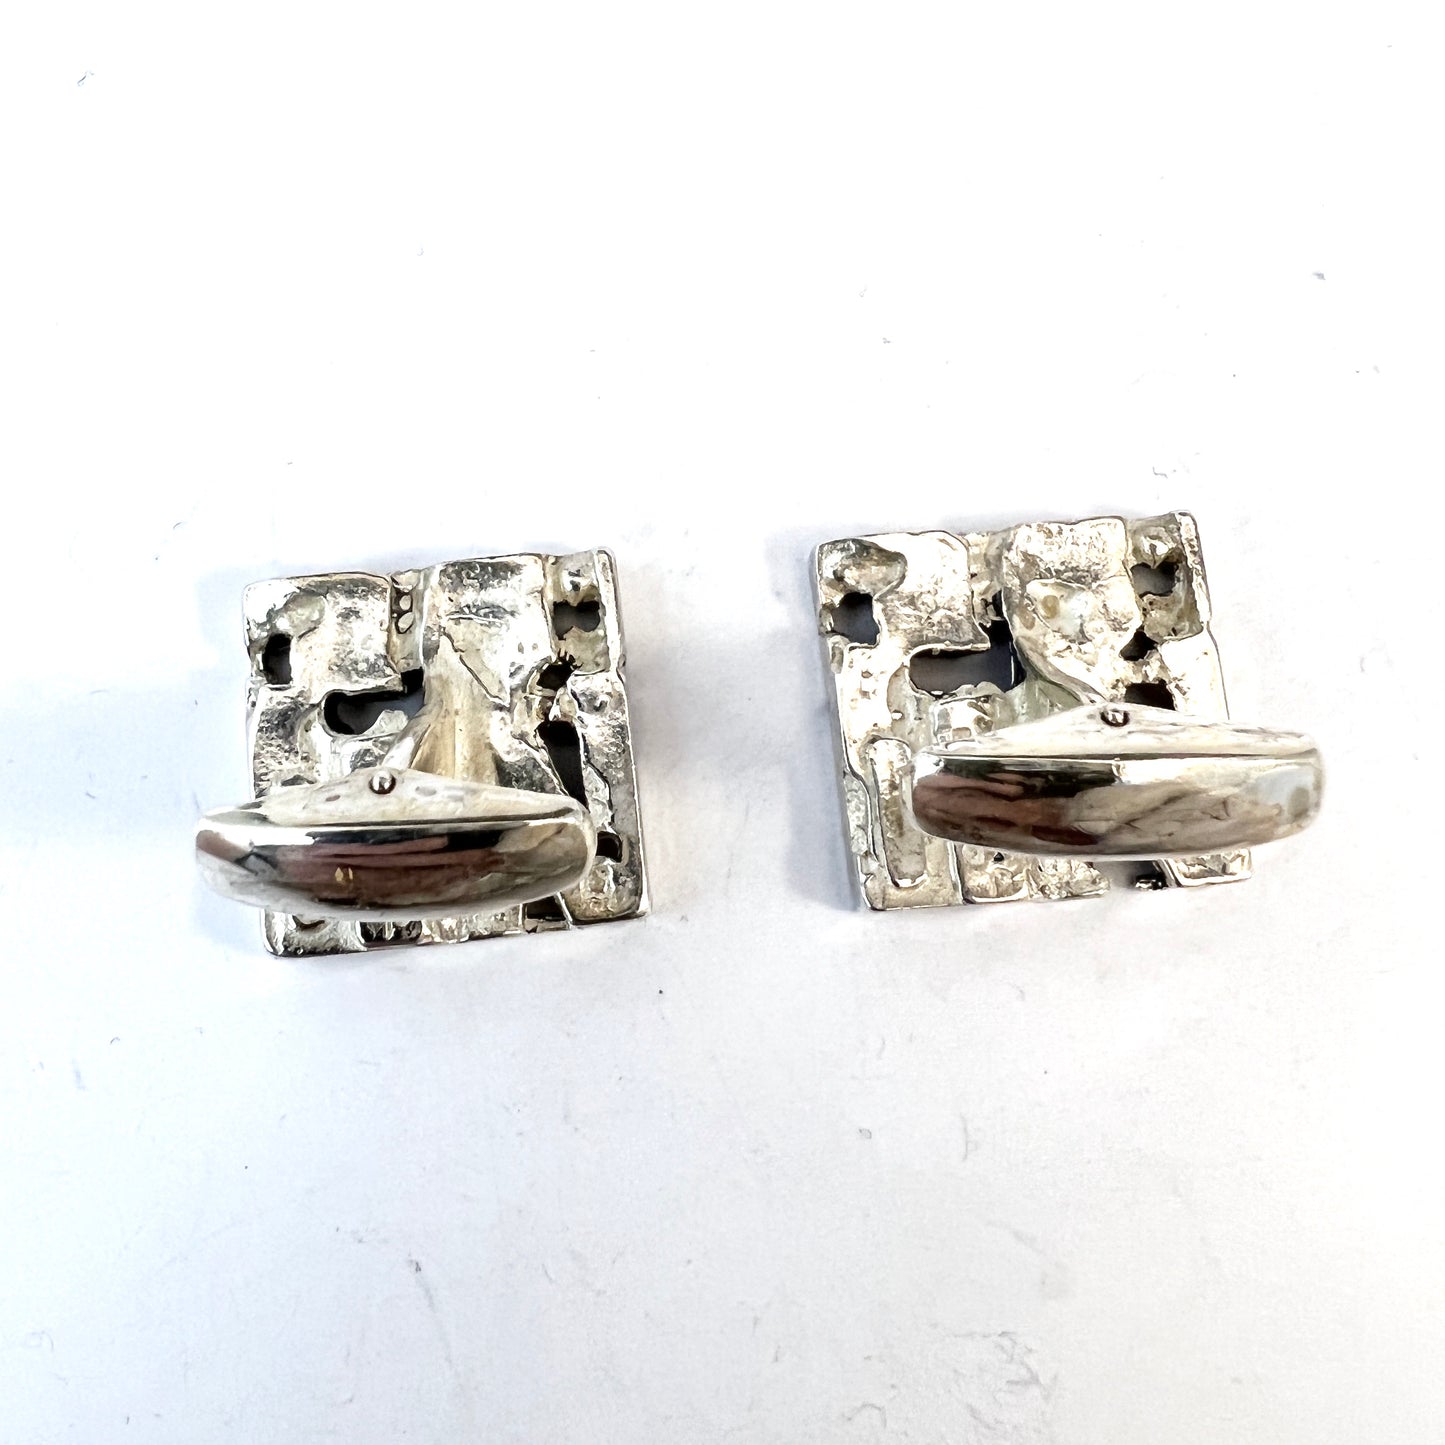 Jorma Laine for Turun Hopea Finland 1974 Large Solid Silver Cufflinks. Signed.